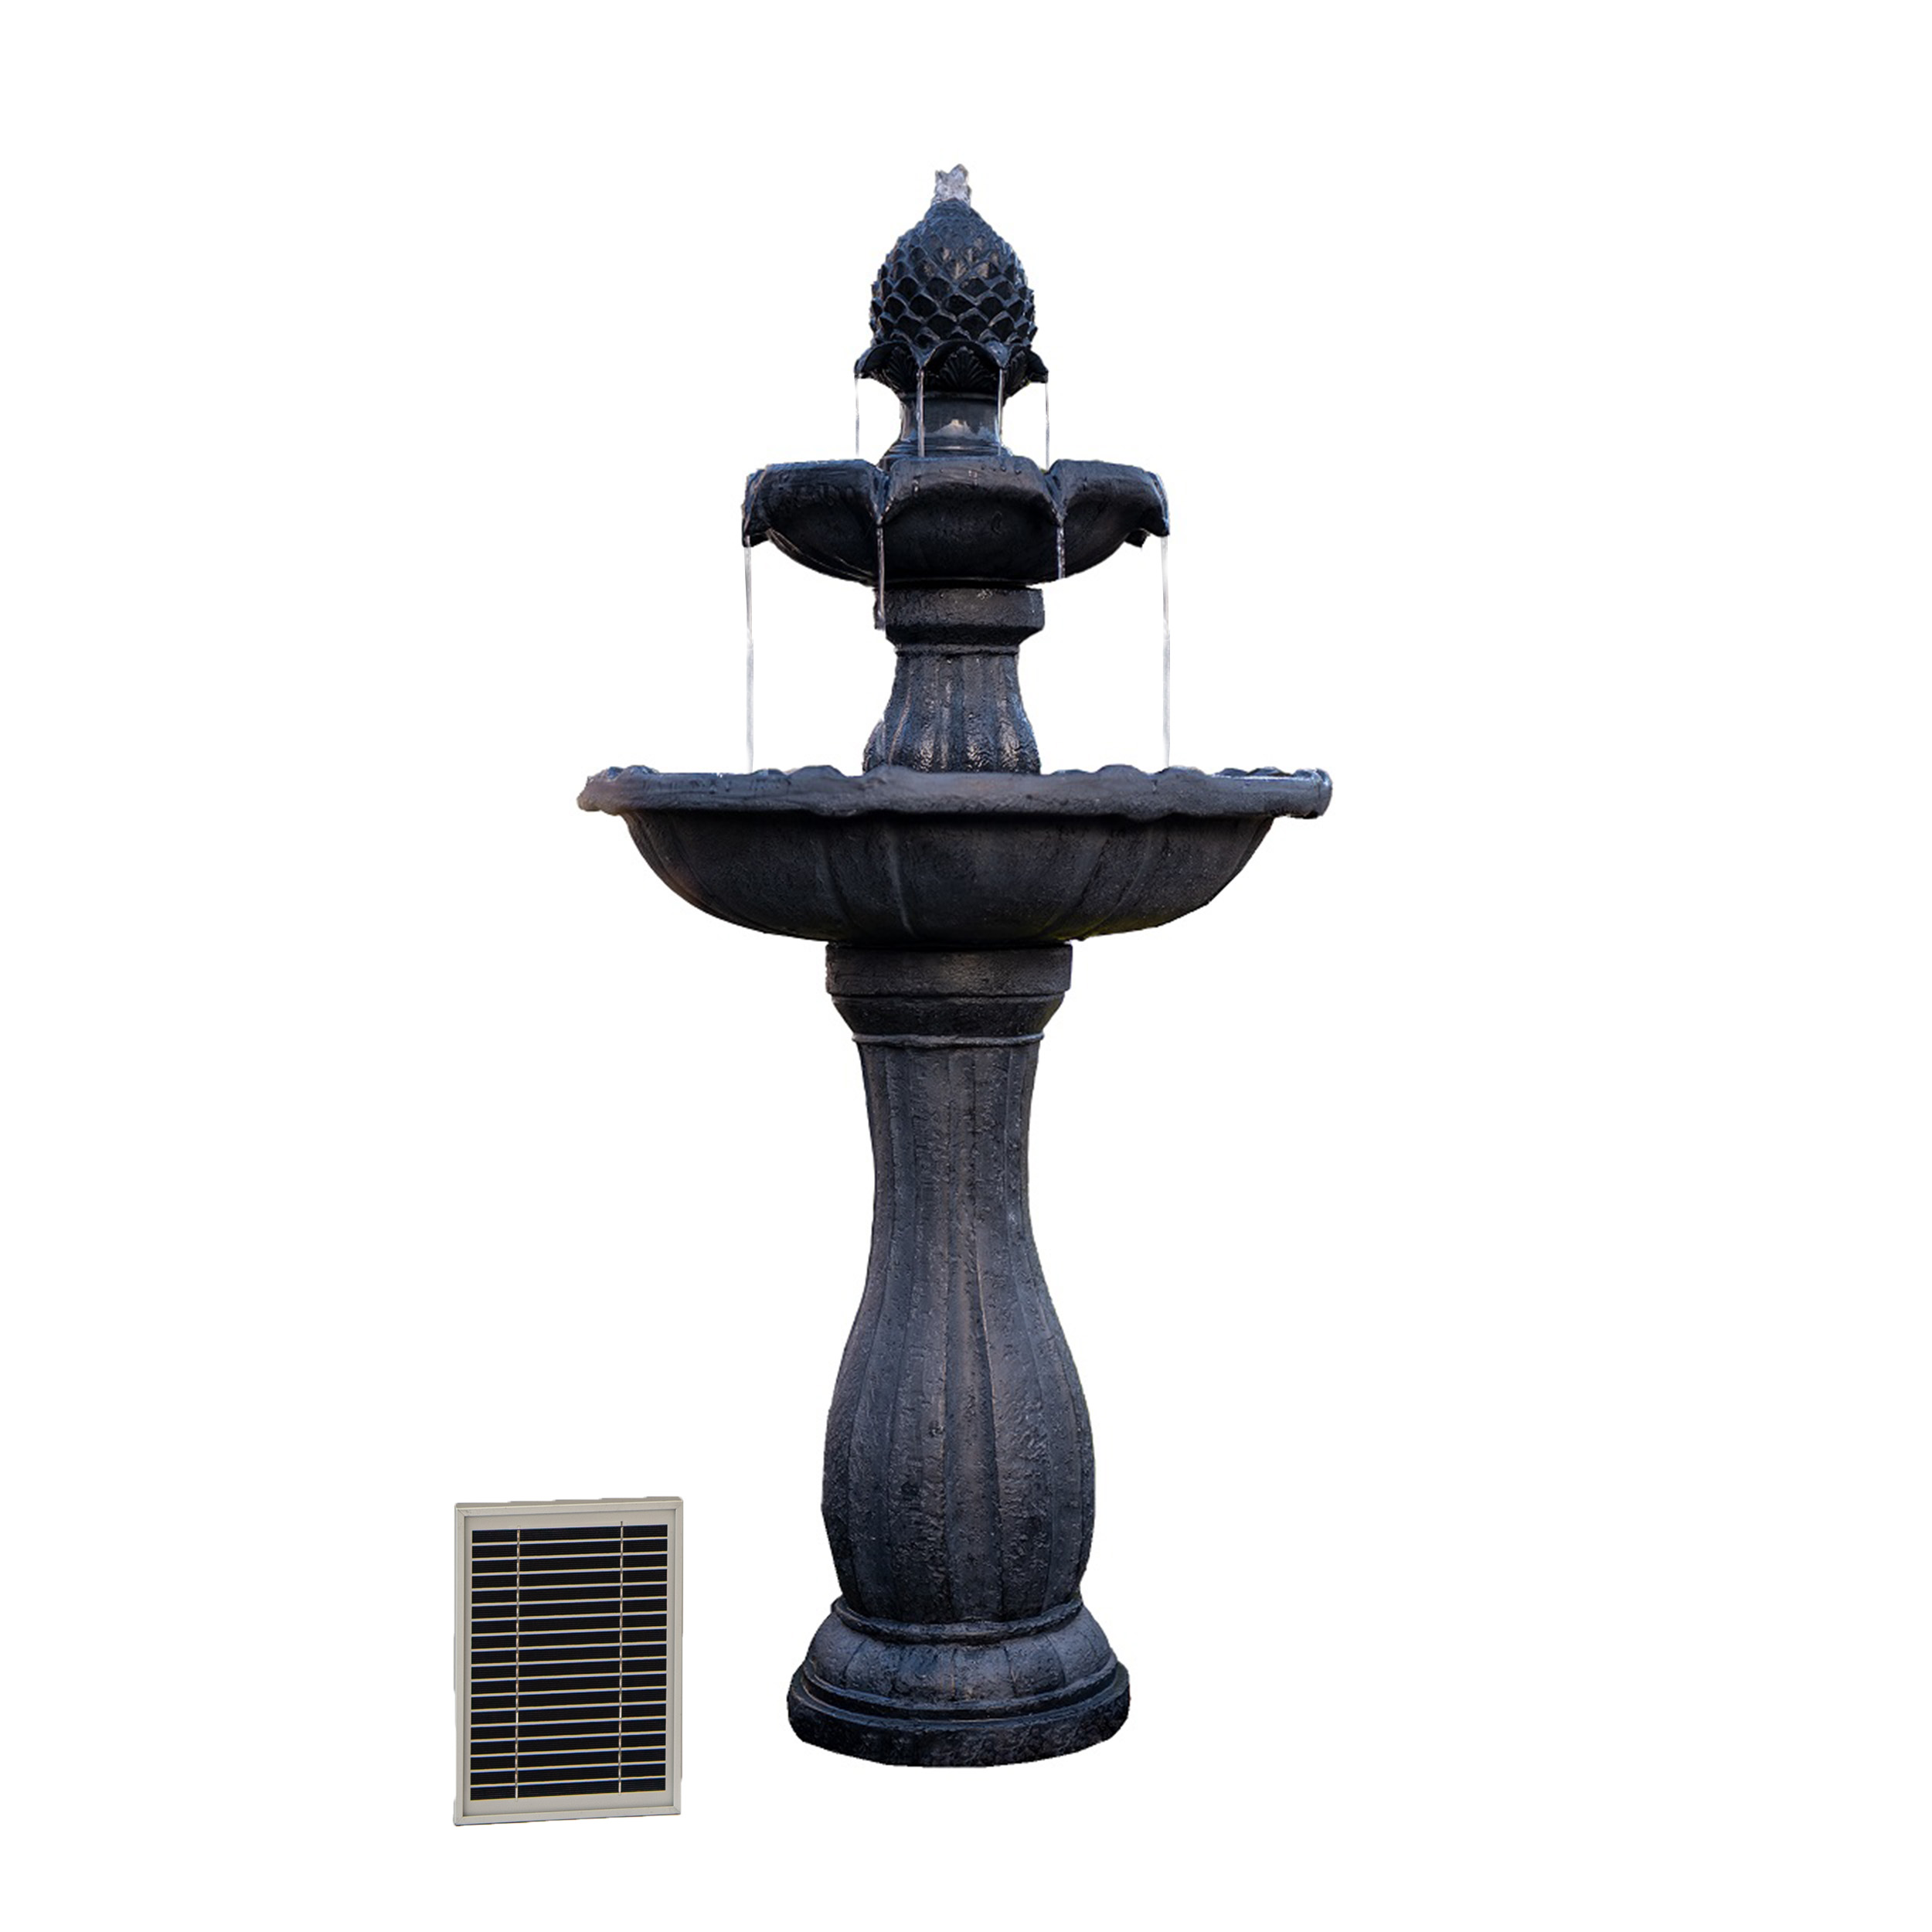 Shop our wide selection of Xbrand solar powered water fountains. This 2-tier outdoor water fountain includes an auto shut off pump, decreasing the amount of maintenance.